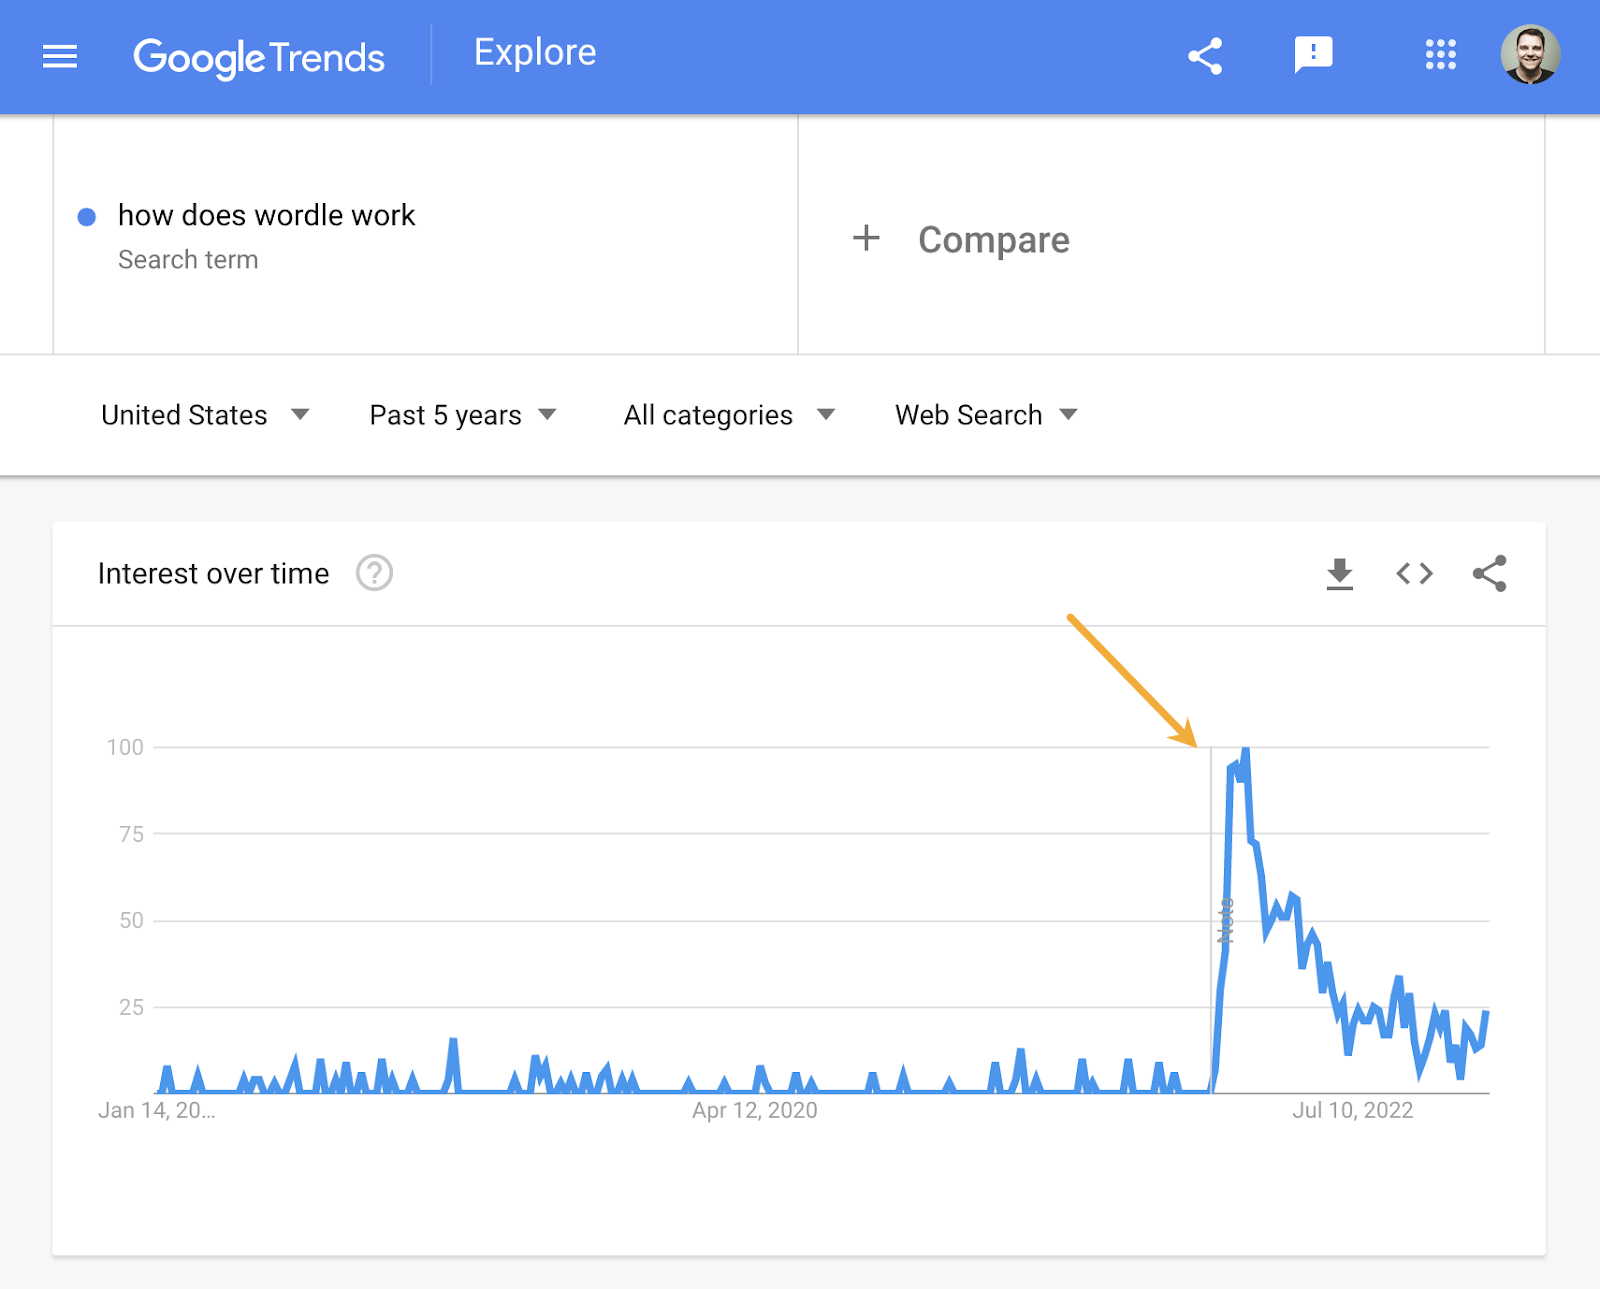 U.S. interest in "how does wordle work" is declining, according to Google Trends